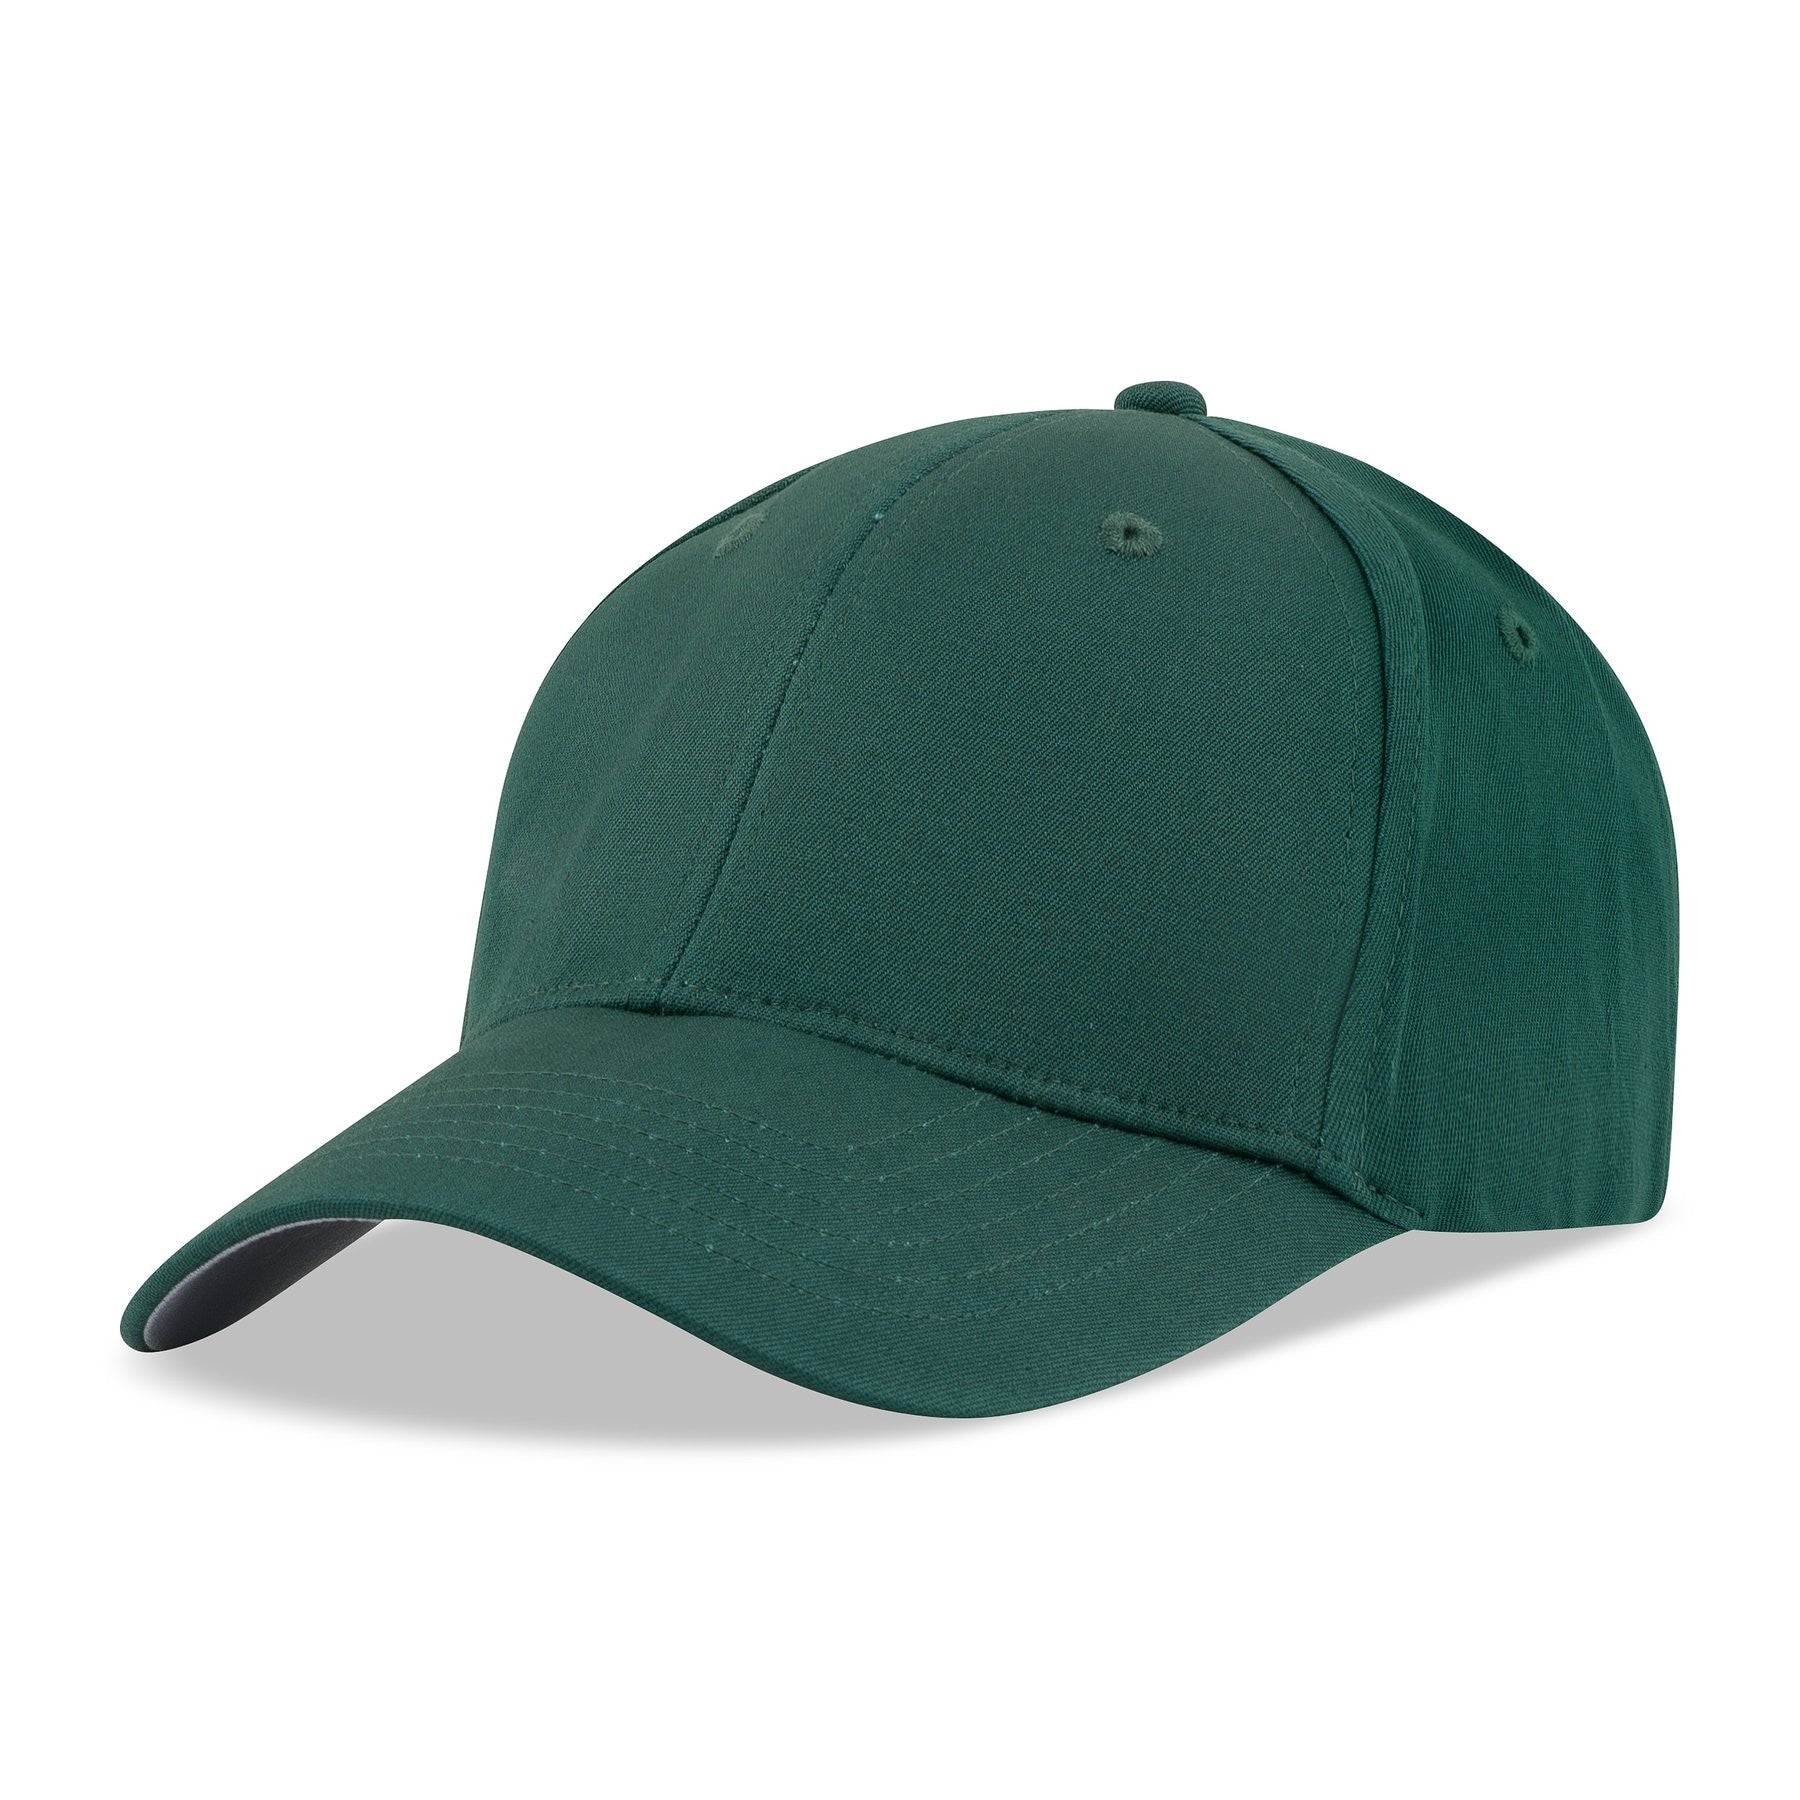 3000 Nu-Fit Pro-Style Cotton Spandex Fitted Cap - Budget Promotion Headware CA$ 18.39 Dark Green